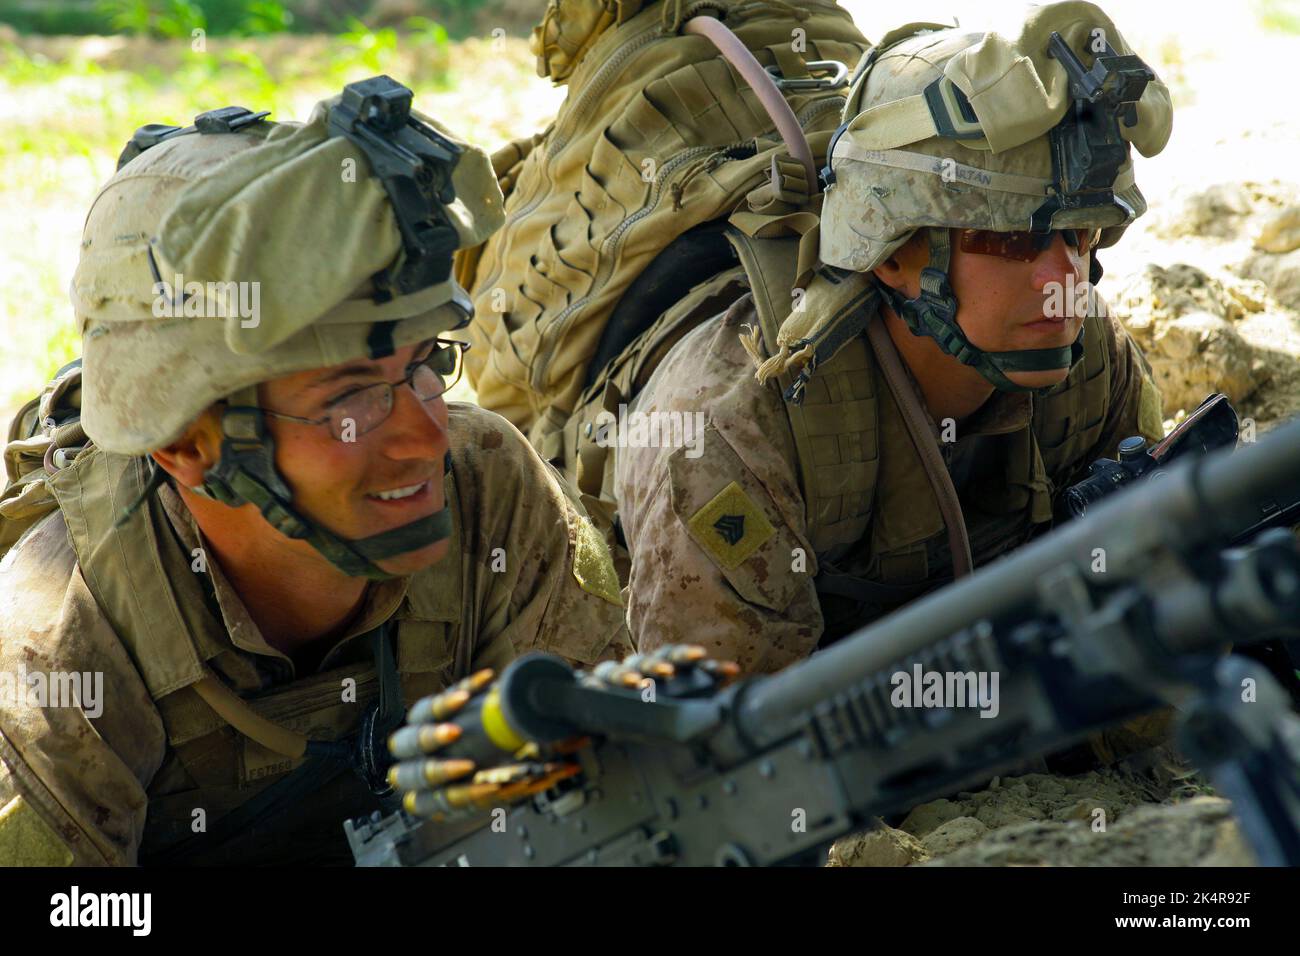 HELMAND PROVINCE, AFGHANISTAN - 27 July 2009 - US Marines Corps Lance Cpl. Raymond Brabau, left, and Sgt. Jared Hansen with Fox Company, 2nd Battalion Stock Photo